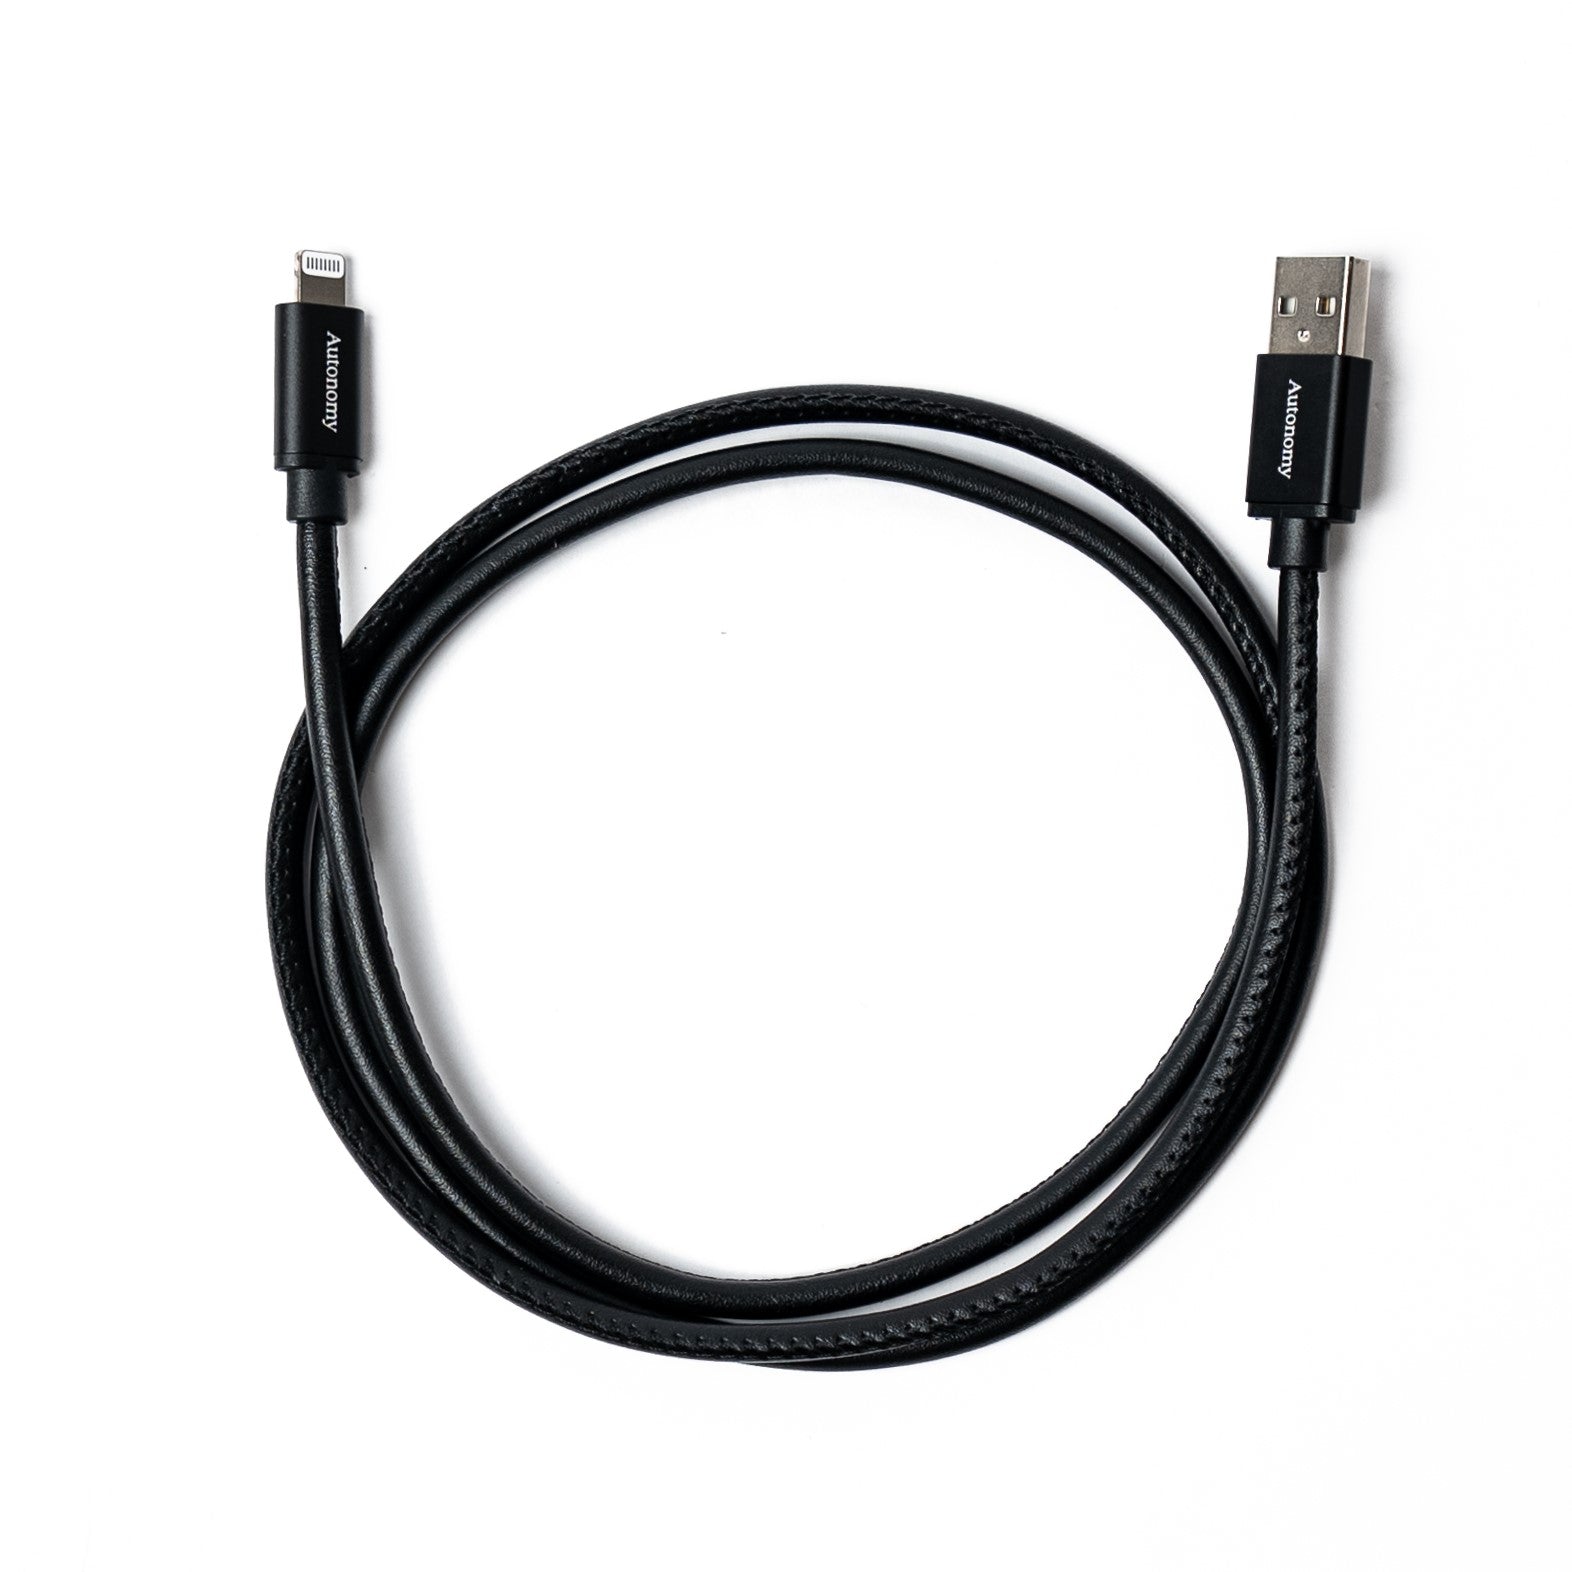 Black autonomy branded usb iphone charger cable on a white background